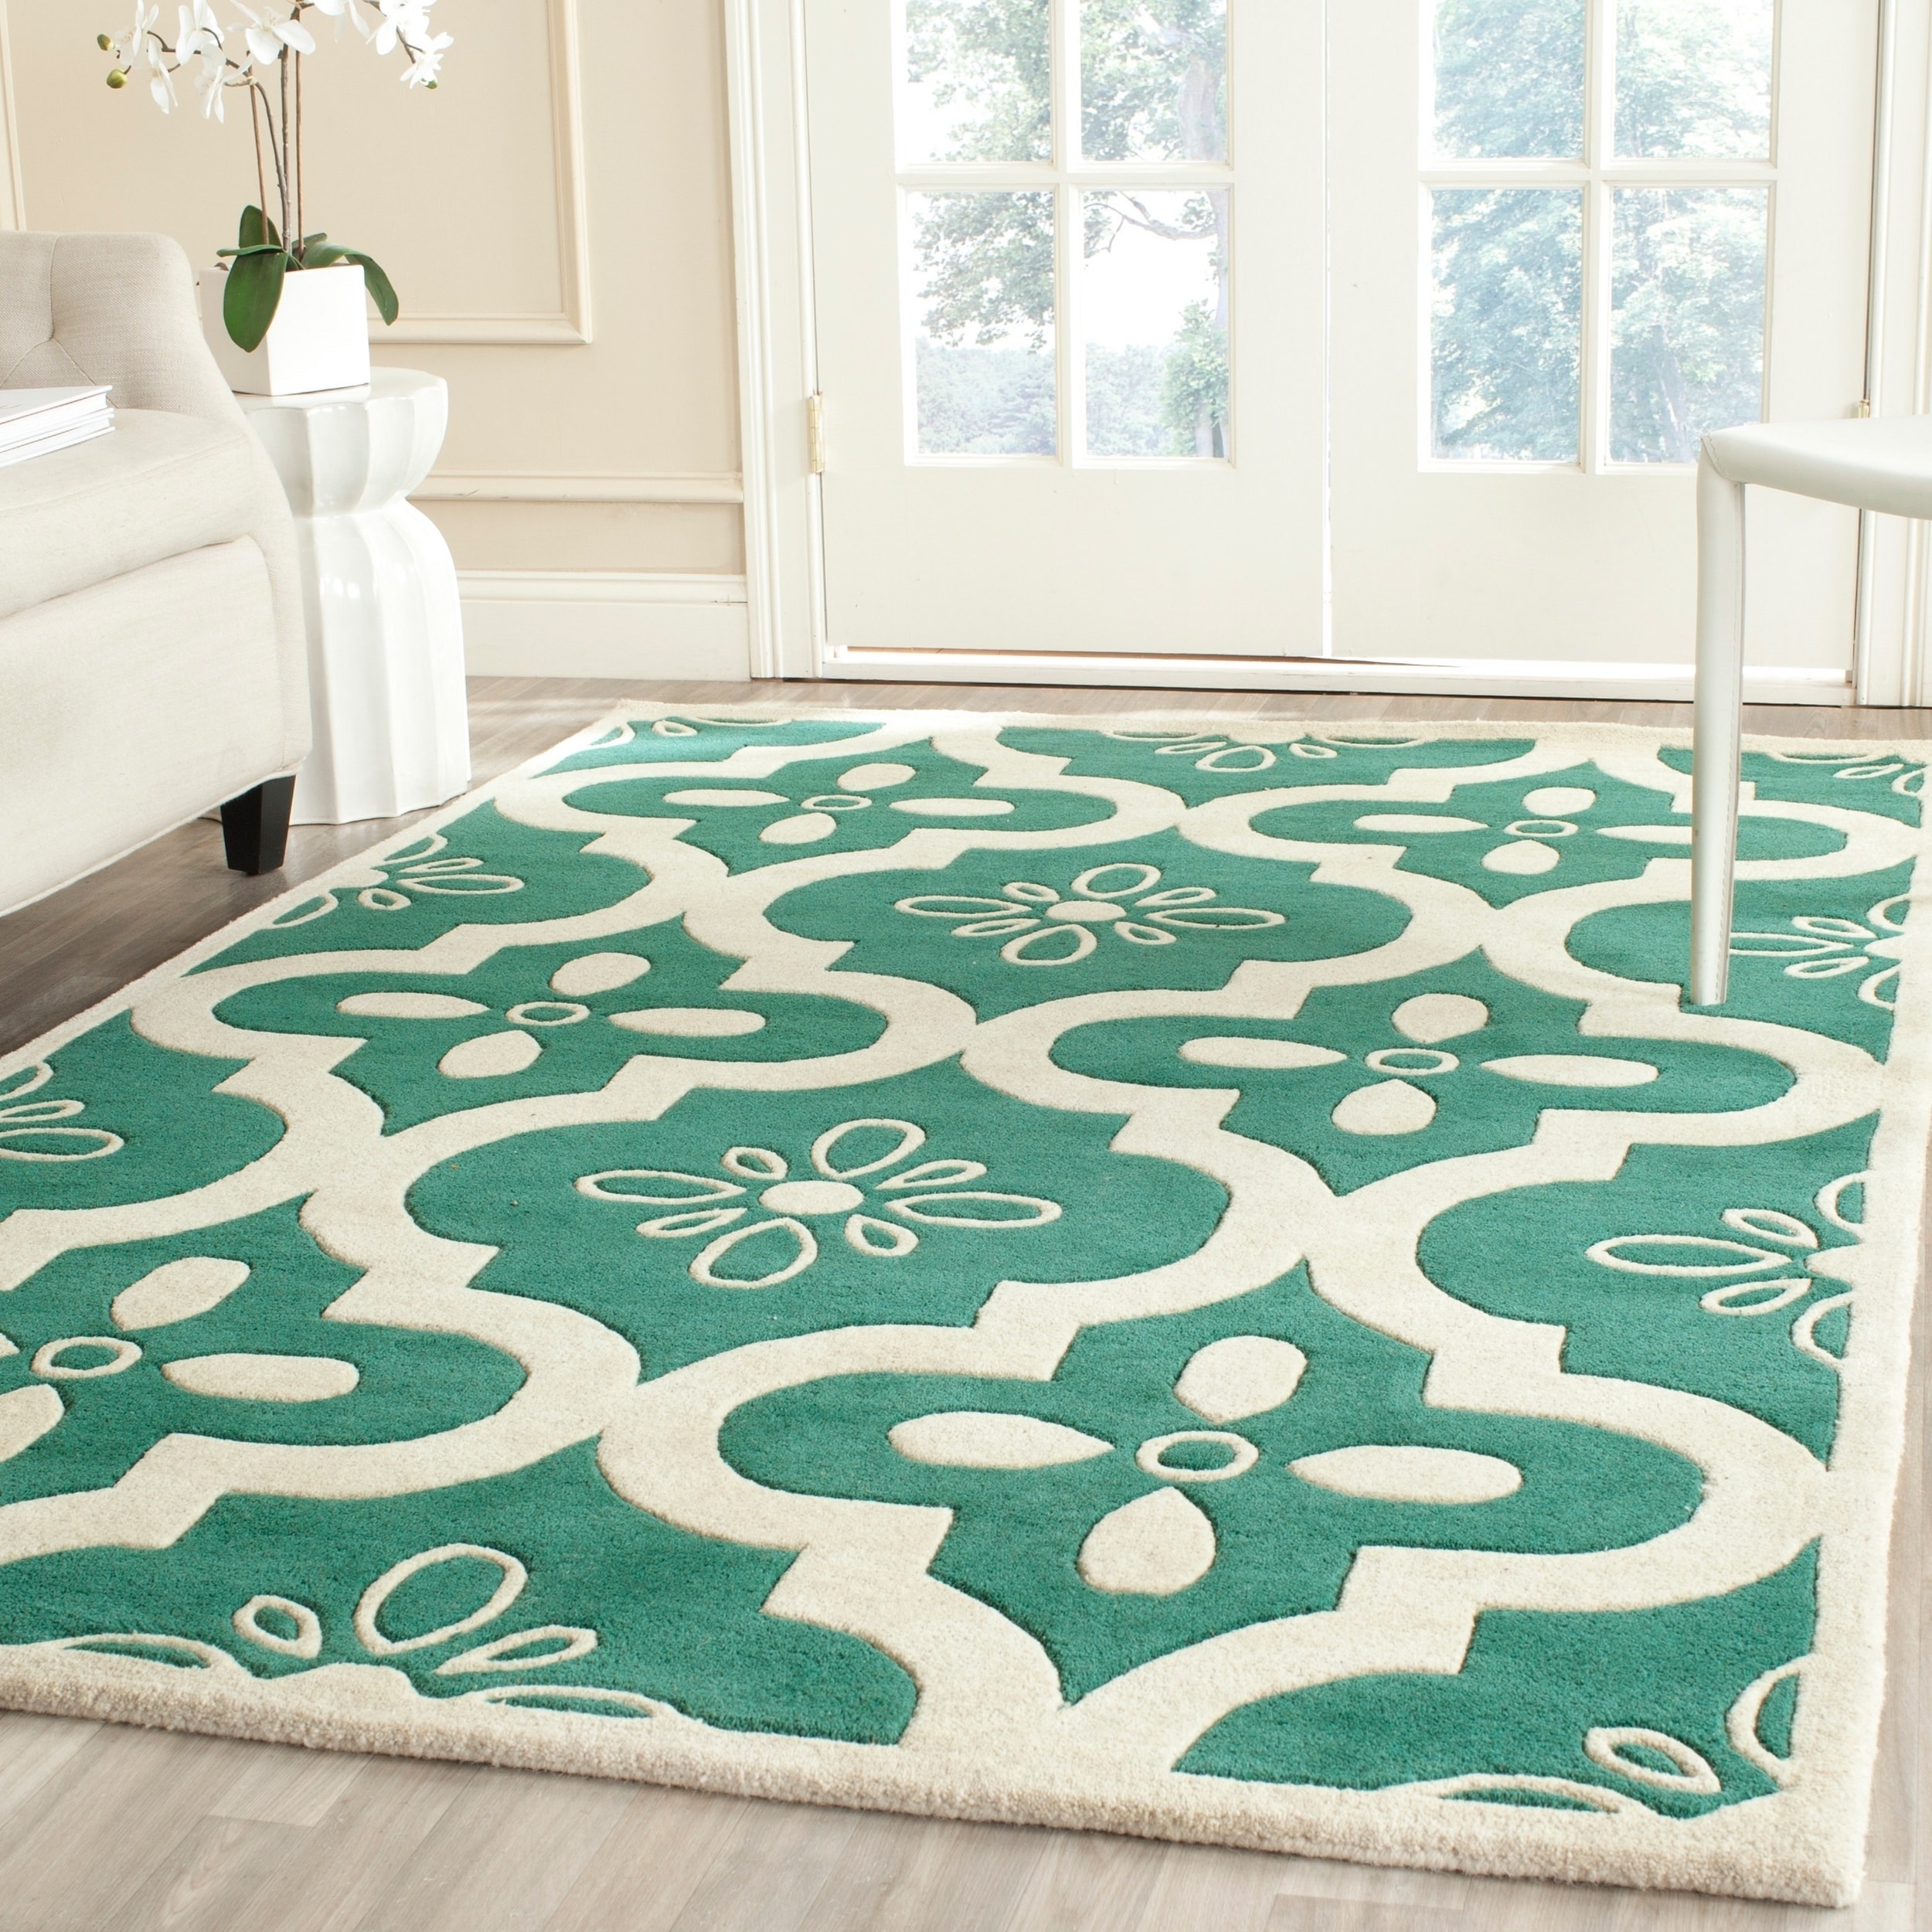 Safavieh Handmade Contemporary Moroccan Chatham Teal/ Ivory Wool Rug (8 X 10)